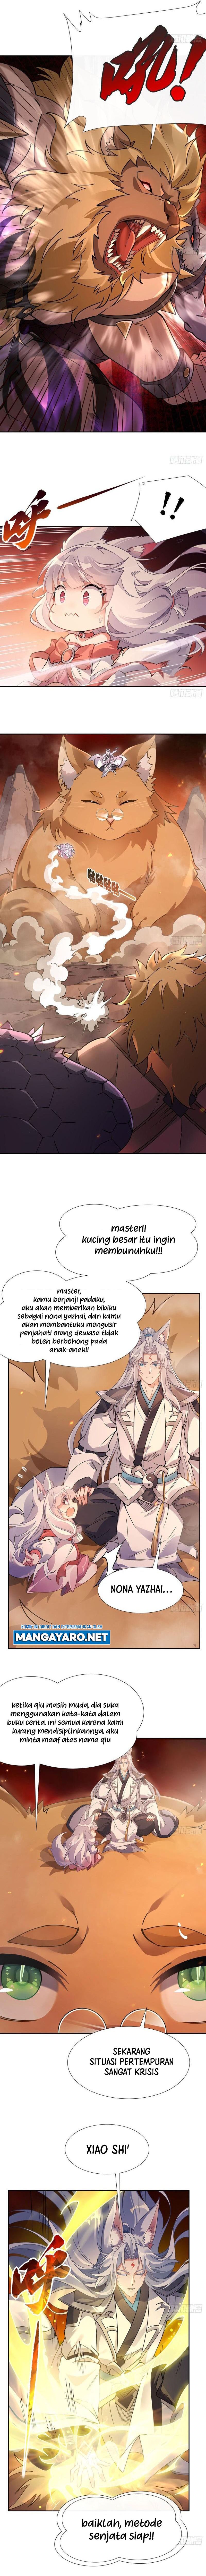 Dilarang COPAS - situs resmi www.mangacanblog.com - Komik my female apprentices are all big shots from the future 175 - chapter 175 176 Indonesia my female apprentices are all big shots from the future 175 - chapter 175 Terbaru 6|Baca Manga Komik Indonesia|Mangacan